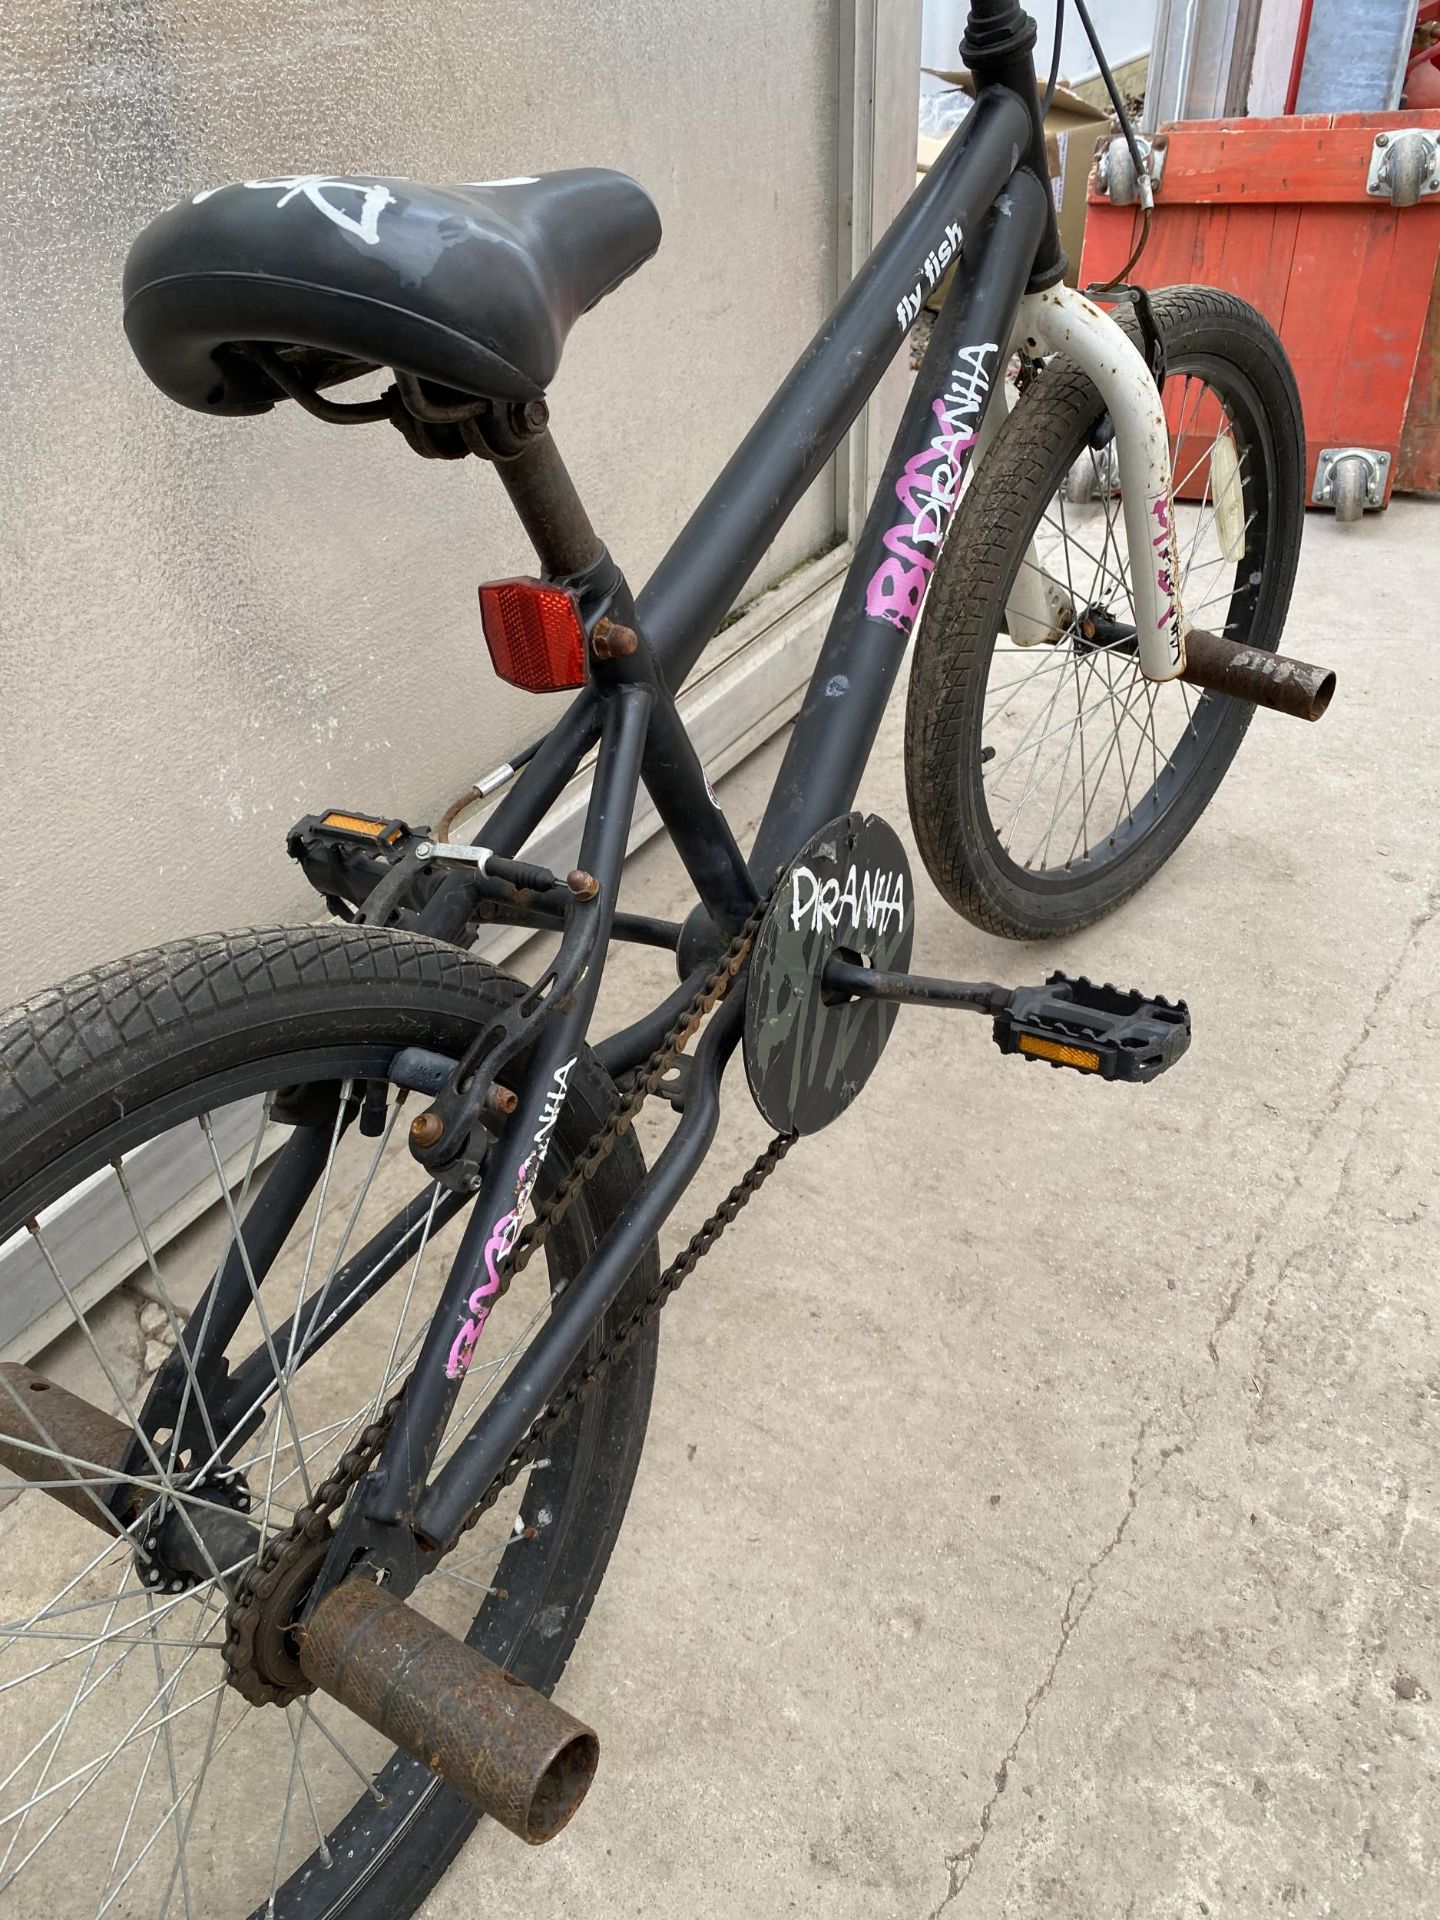 A PIRANHA BMX BIKE WITH FRONT AND REAR STUNT PEGS - Image 2 of 3